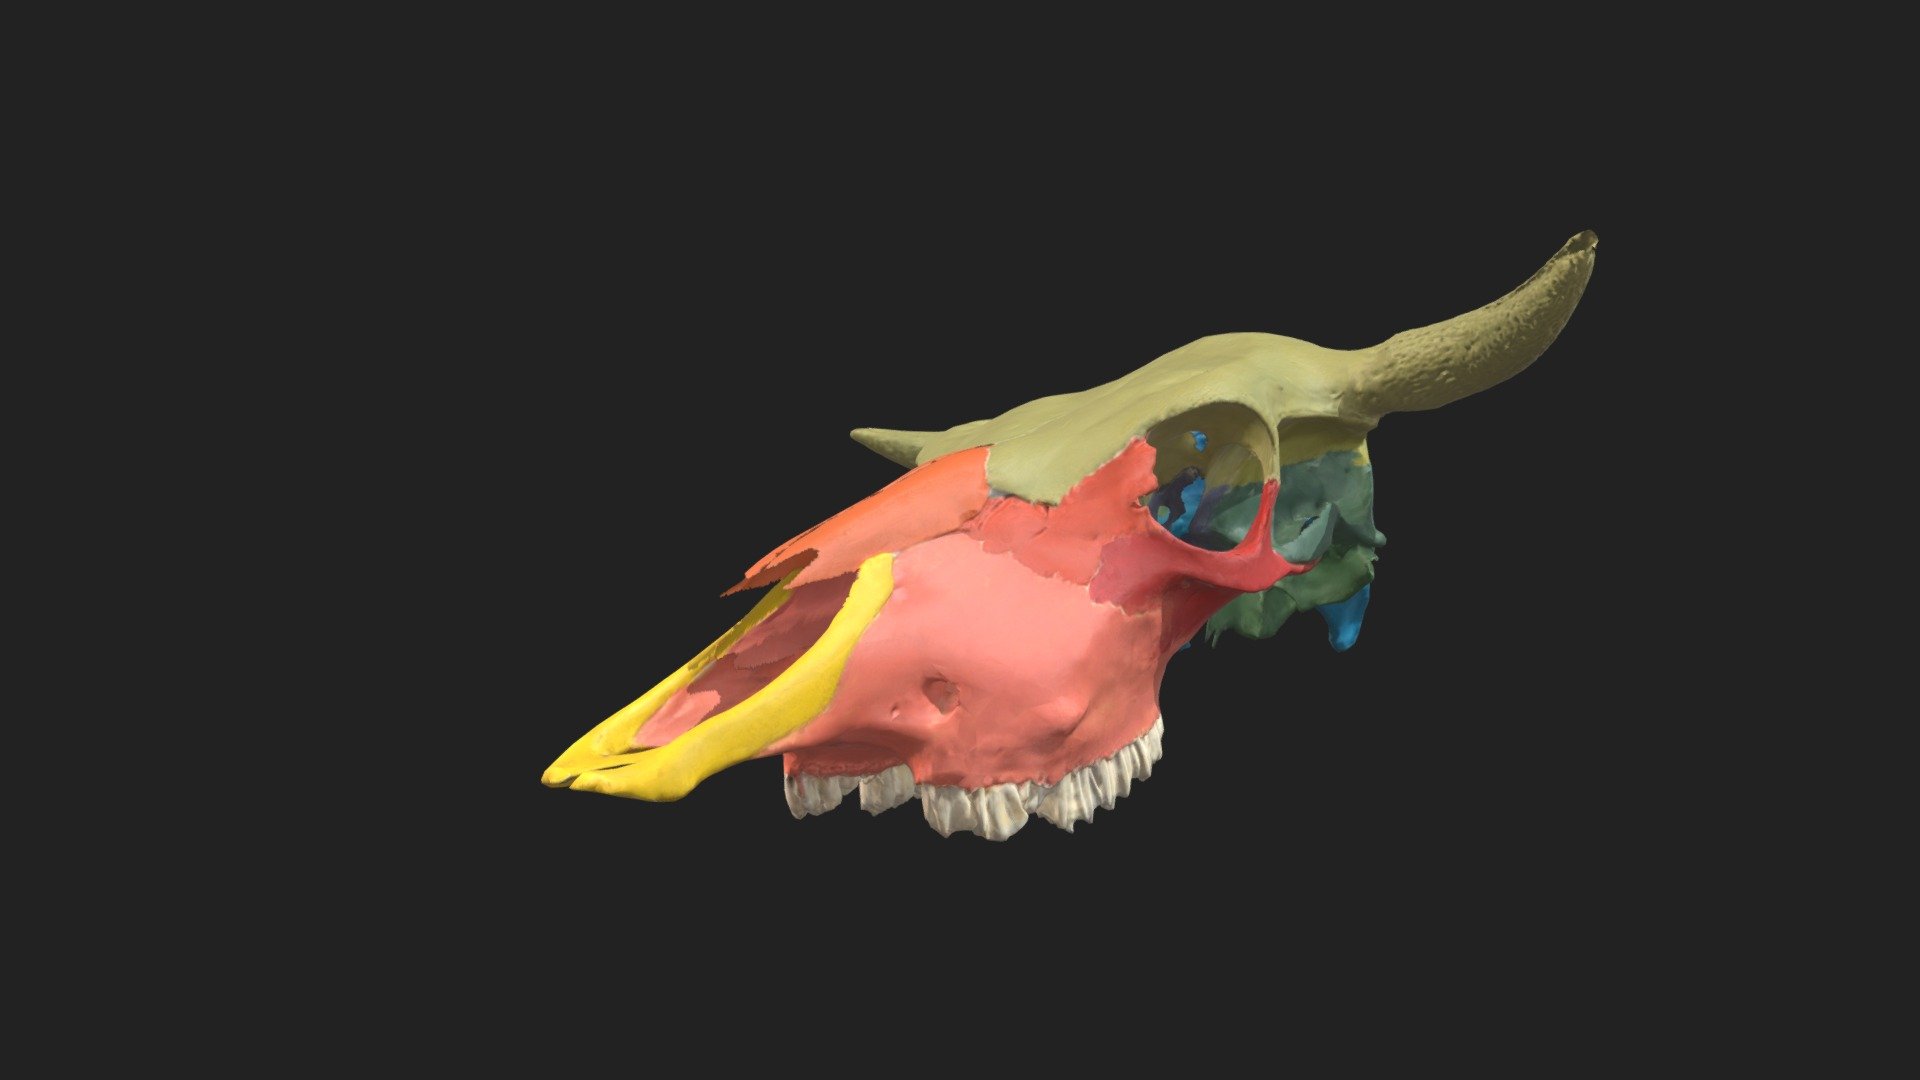 painted upper skull of a bovine 

size of the specimen: 478.4 x 210.3 x 180.7 mm

3D scanning performed with the structured light scanner “Artec Spider”

caption:
yellow: incisive bone (Os incisivum) 
orange: nasale bone (Os nasale)
pink: maxilla (Maxilla) 
dark orange: lacrimal bone (Os lacrimale) 
red: zygomatic bone (Os zygomaticum) 
pale green: frontal bone (Os frontale) 
maygreen: parietal bone (Os parietale) 
olive green: interparietal bone (Os interparietale) 
dark green: temporal bone (Os temporale) 
dark blue: palatine bone (Os palatinum) 
black: pterygoid bone (Os pterygoideum)
white: vomer (Vomer)
purple: presphenoid (Os praesphenoidale)
dark purple: basisphenoid (Os basisphenoidale) 
pale blue: occipital bone (Os occipitale) 
royal blue: Squama occipitalis - painted bovine upper skull - 3D model by vetanatMunich 3d model